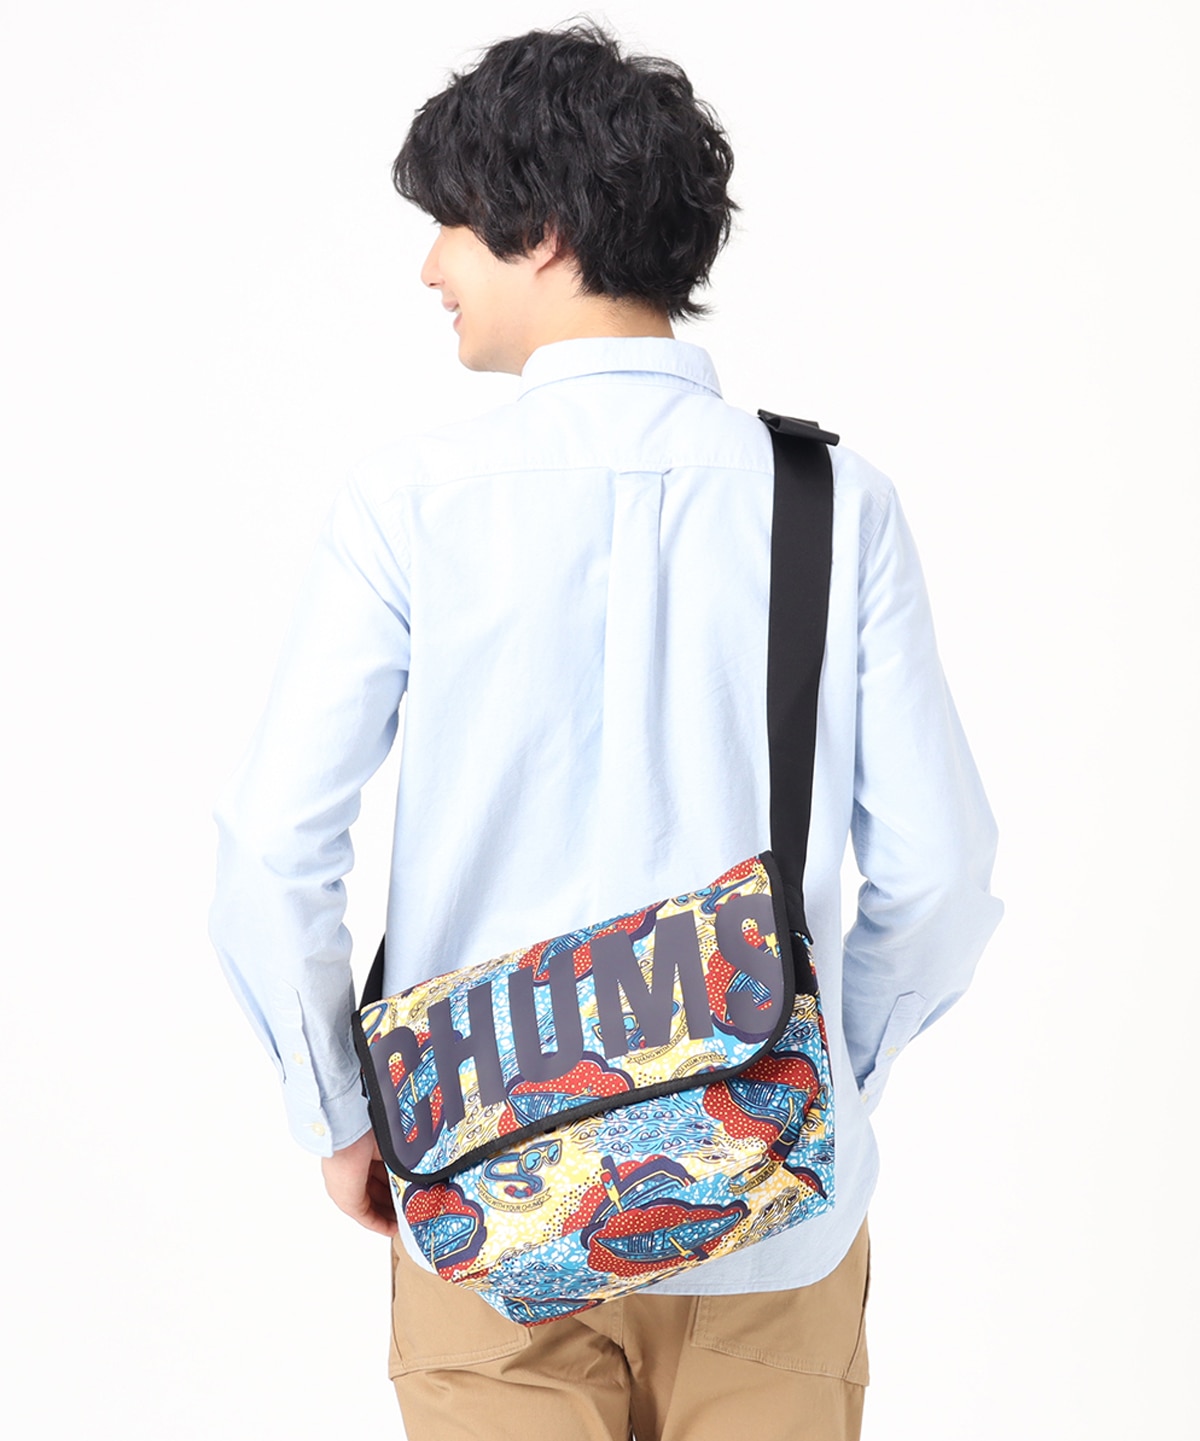 Recycle CHUMS Messenger Bag(リサイクルチャムスメッセンジャーバッグ(メッセンジャーバッグ｜ショルダーバッグ))